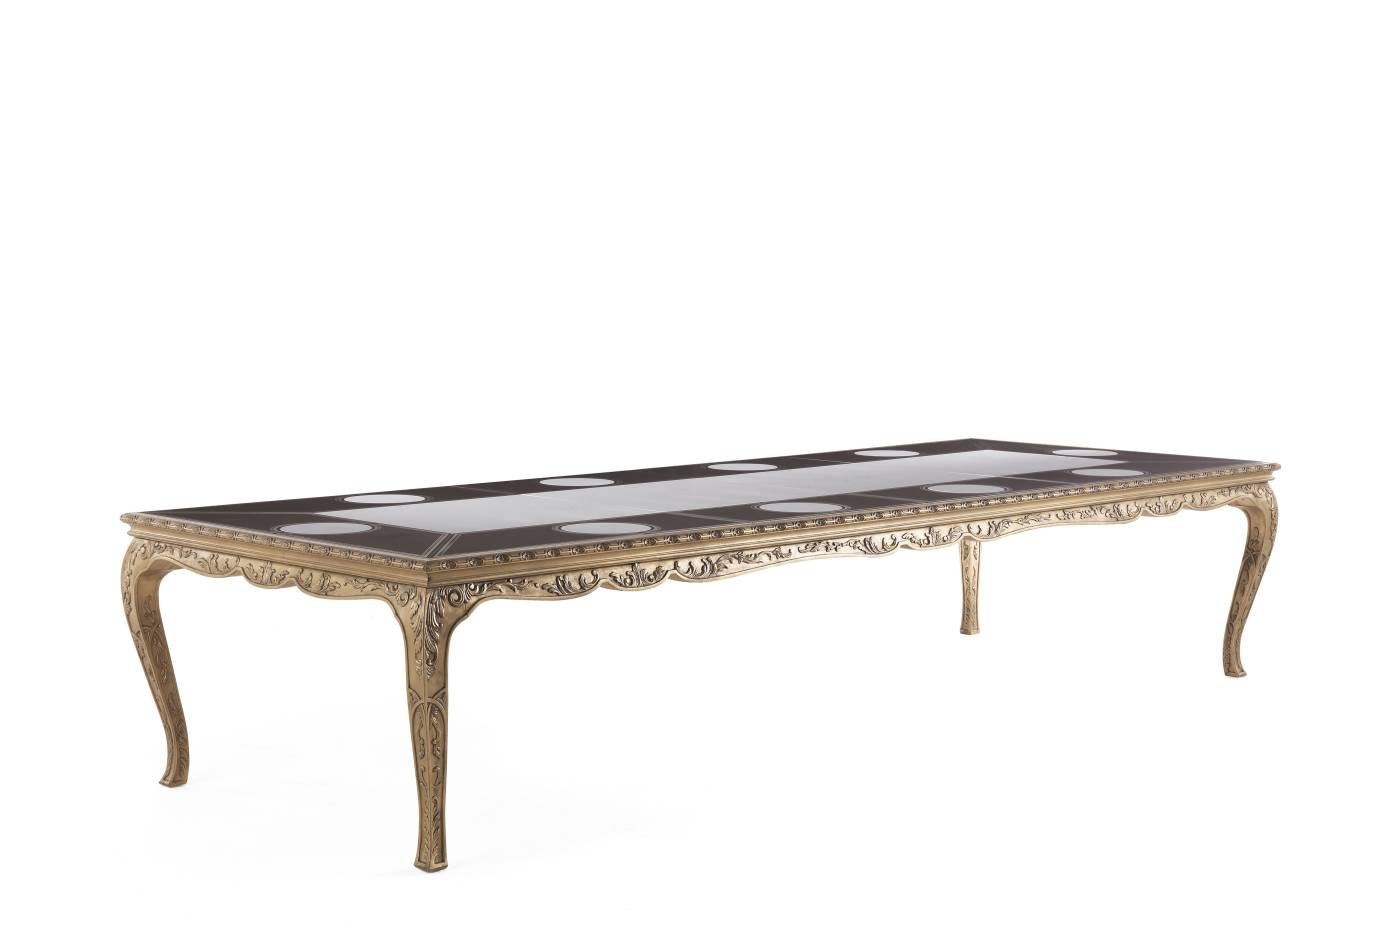 FRAGONARD dining table - Bespoke projects with luxury Made in Italy classic furniture